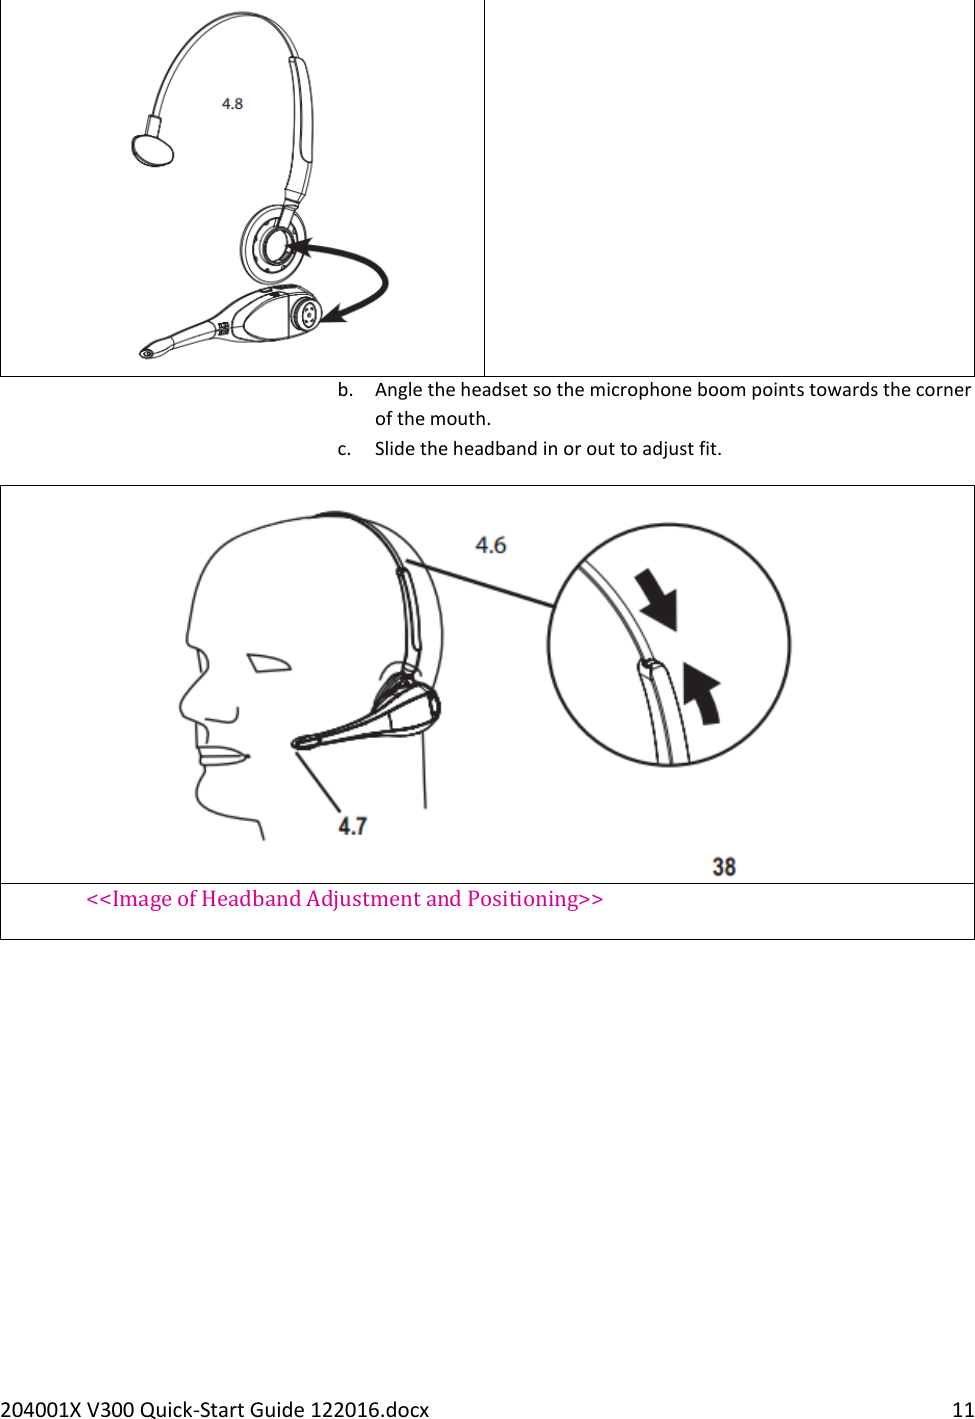 204001X V300 Quick-Start Guide 122016.docx    11  b. Angle the headset so the microphone boom points towards the corner of the mouth. c. Slide the headband in or out to adjust fit.  &lt;&lt;Image of Headband Adjustment and Positioning&gt;&gt;      